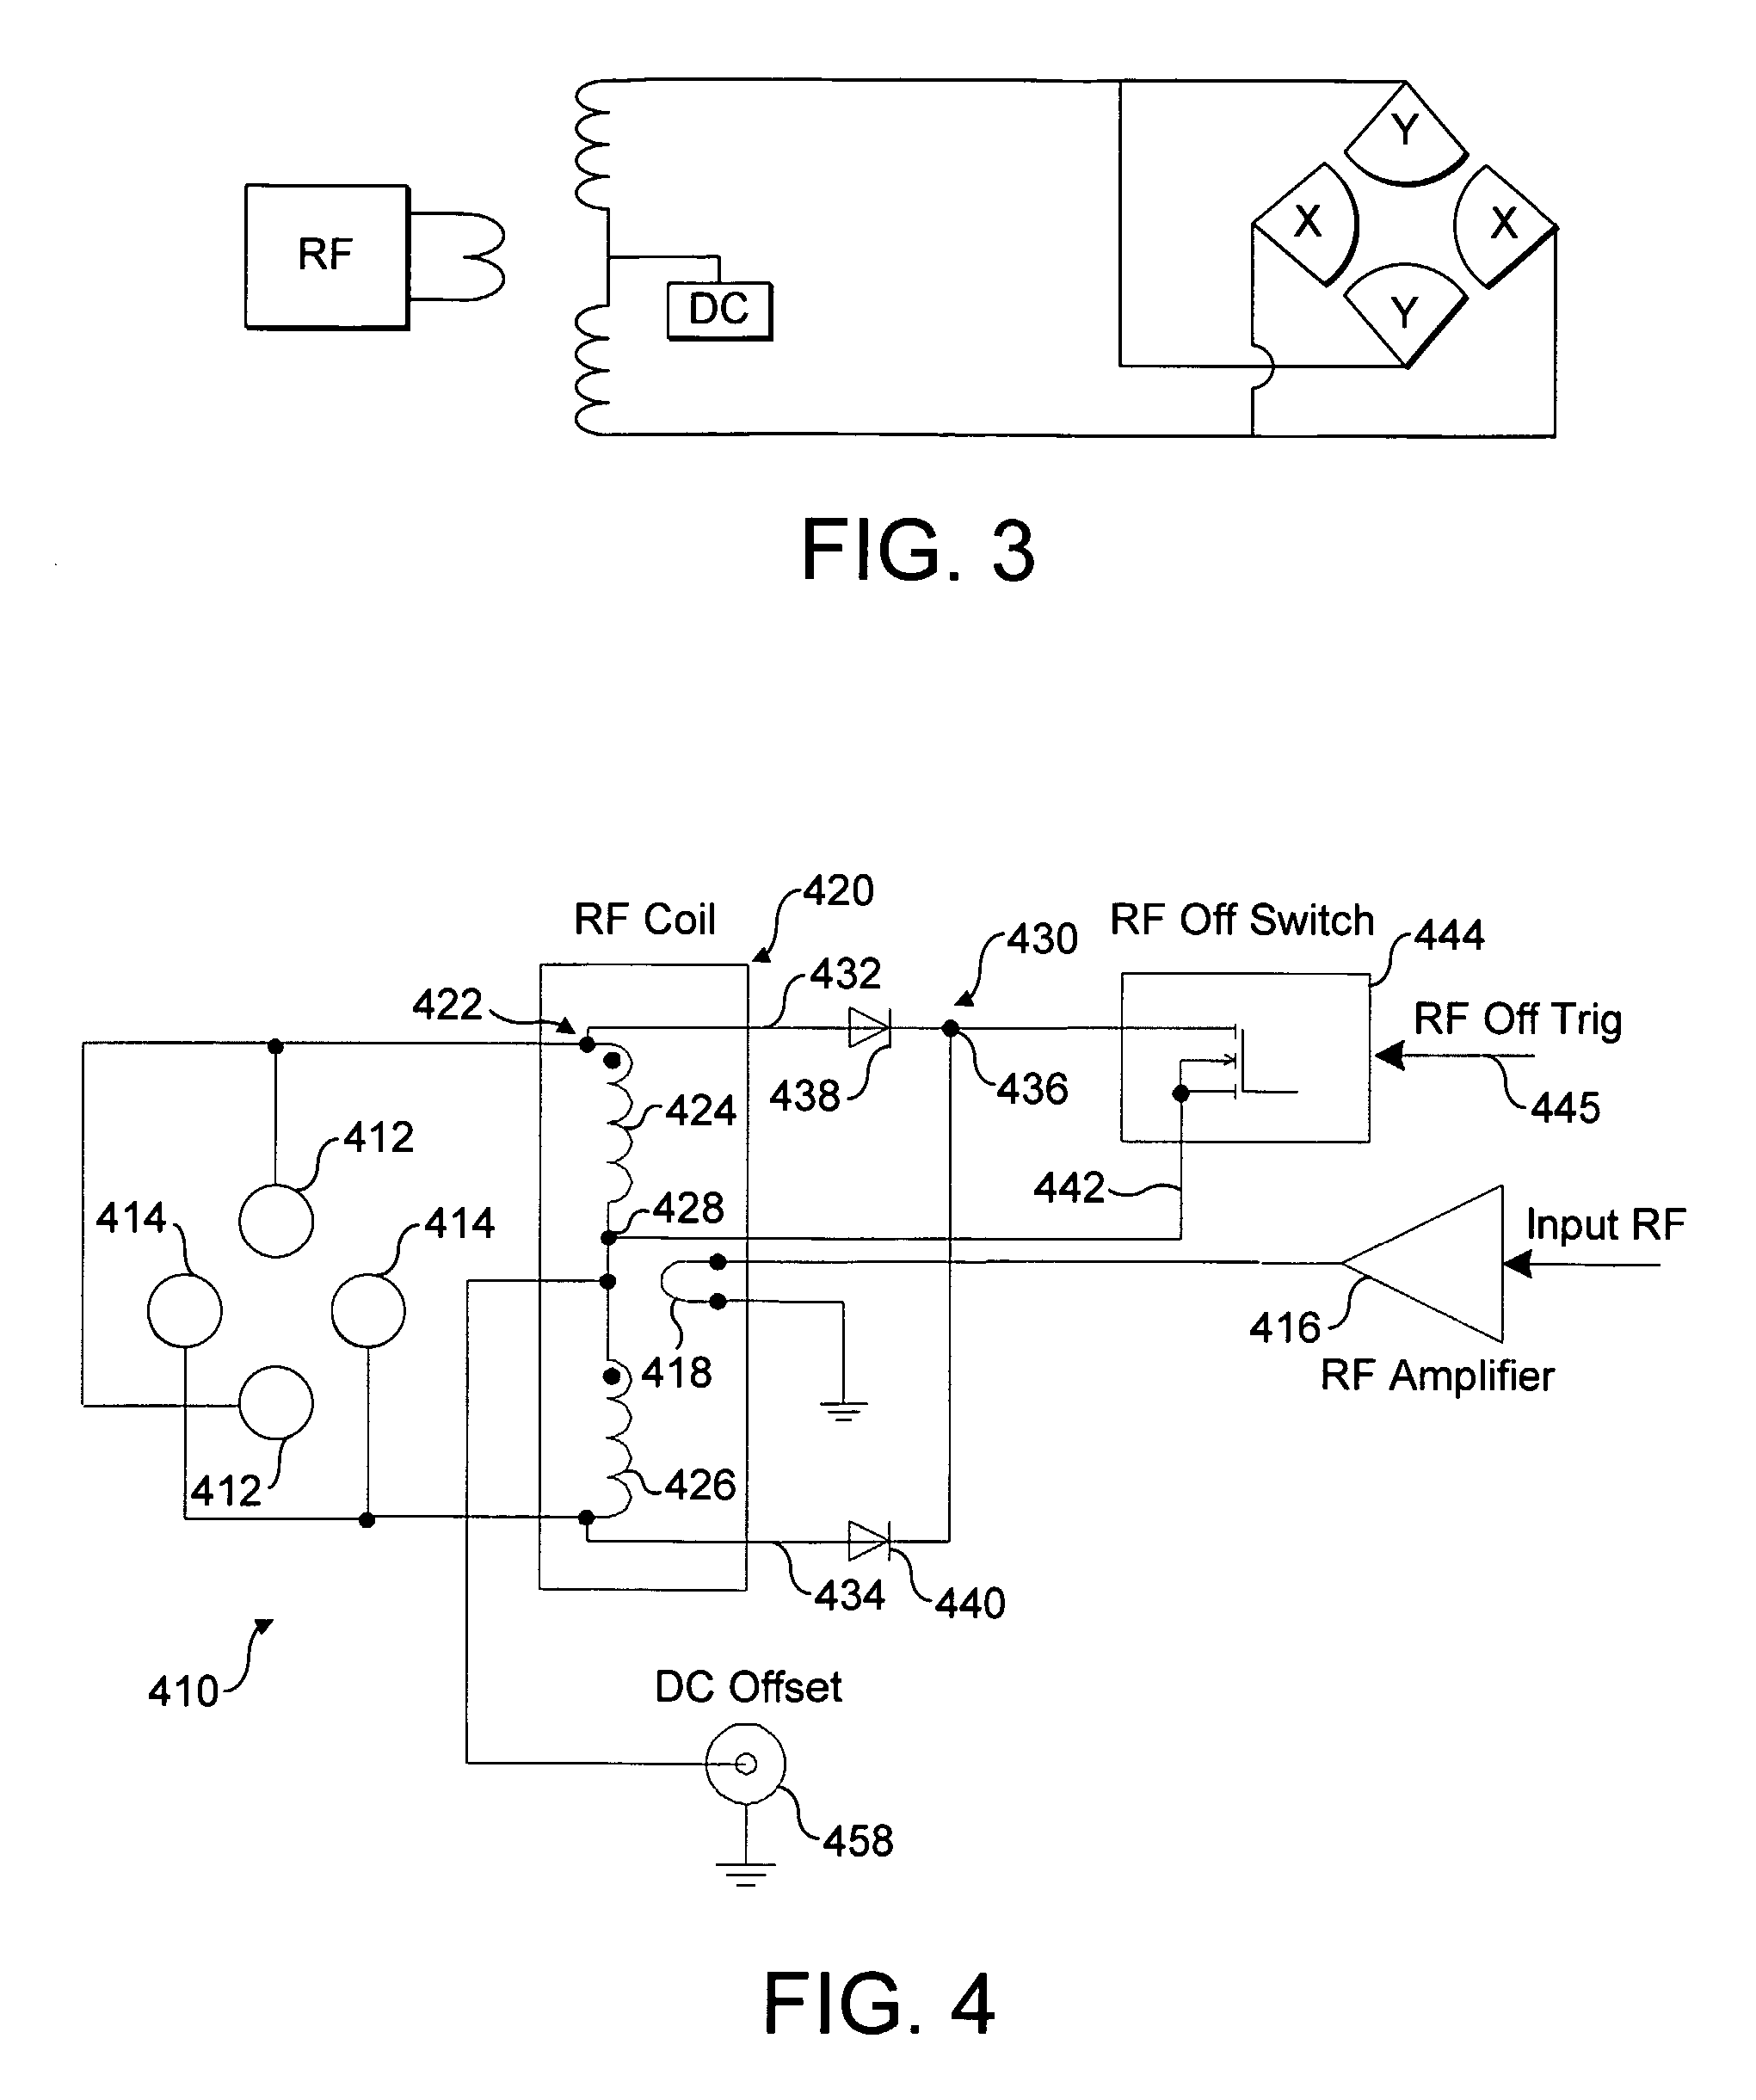 RF power supply for a mass spectrometer